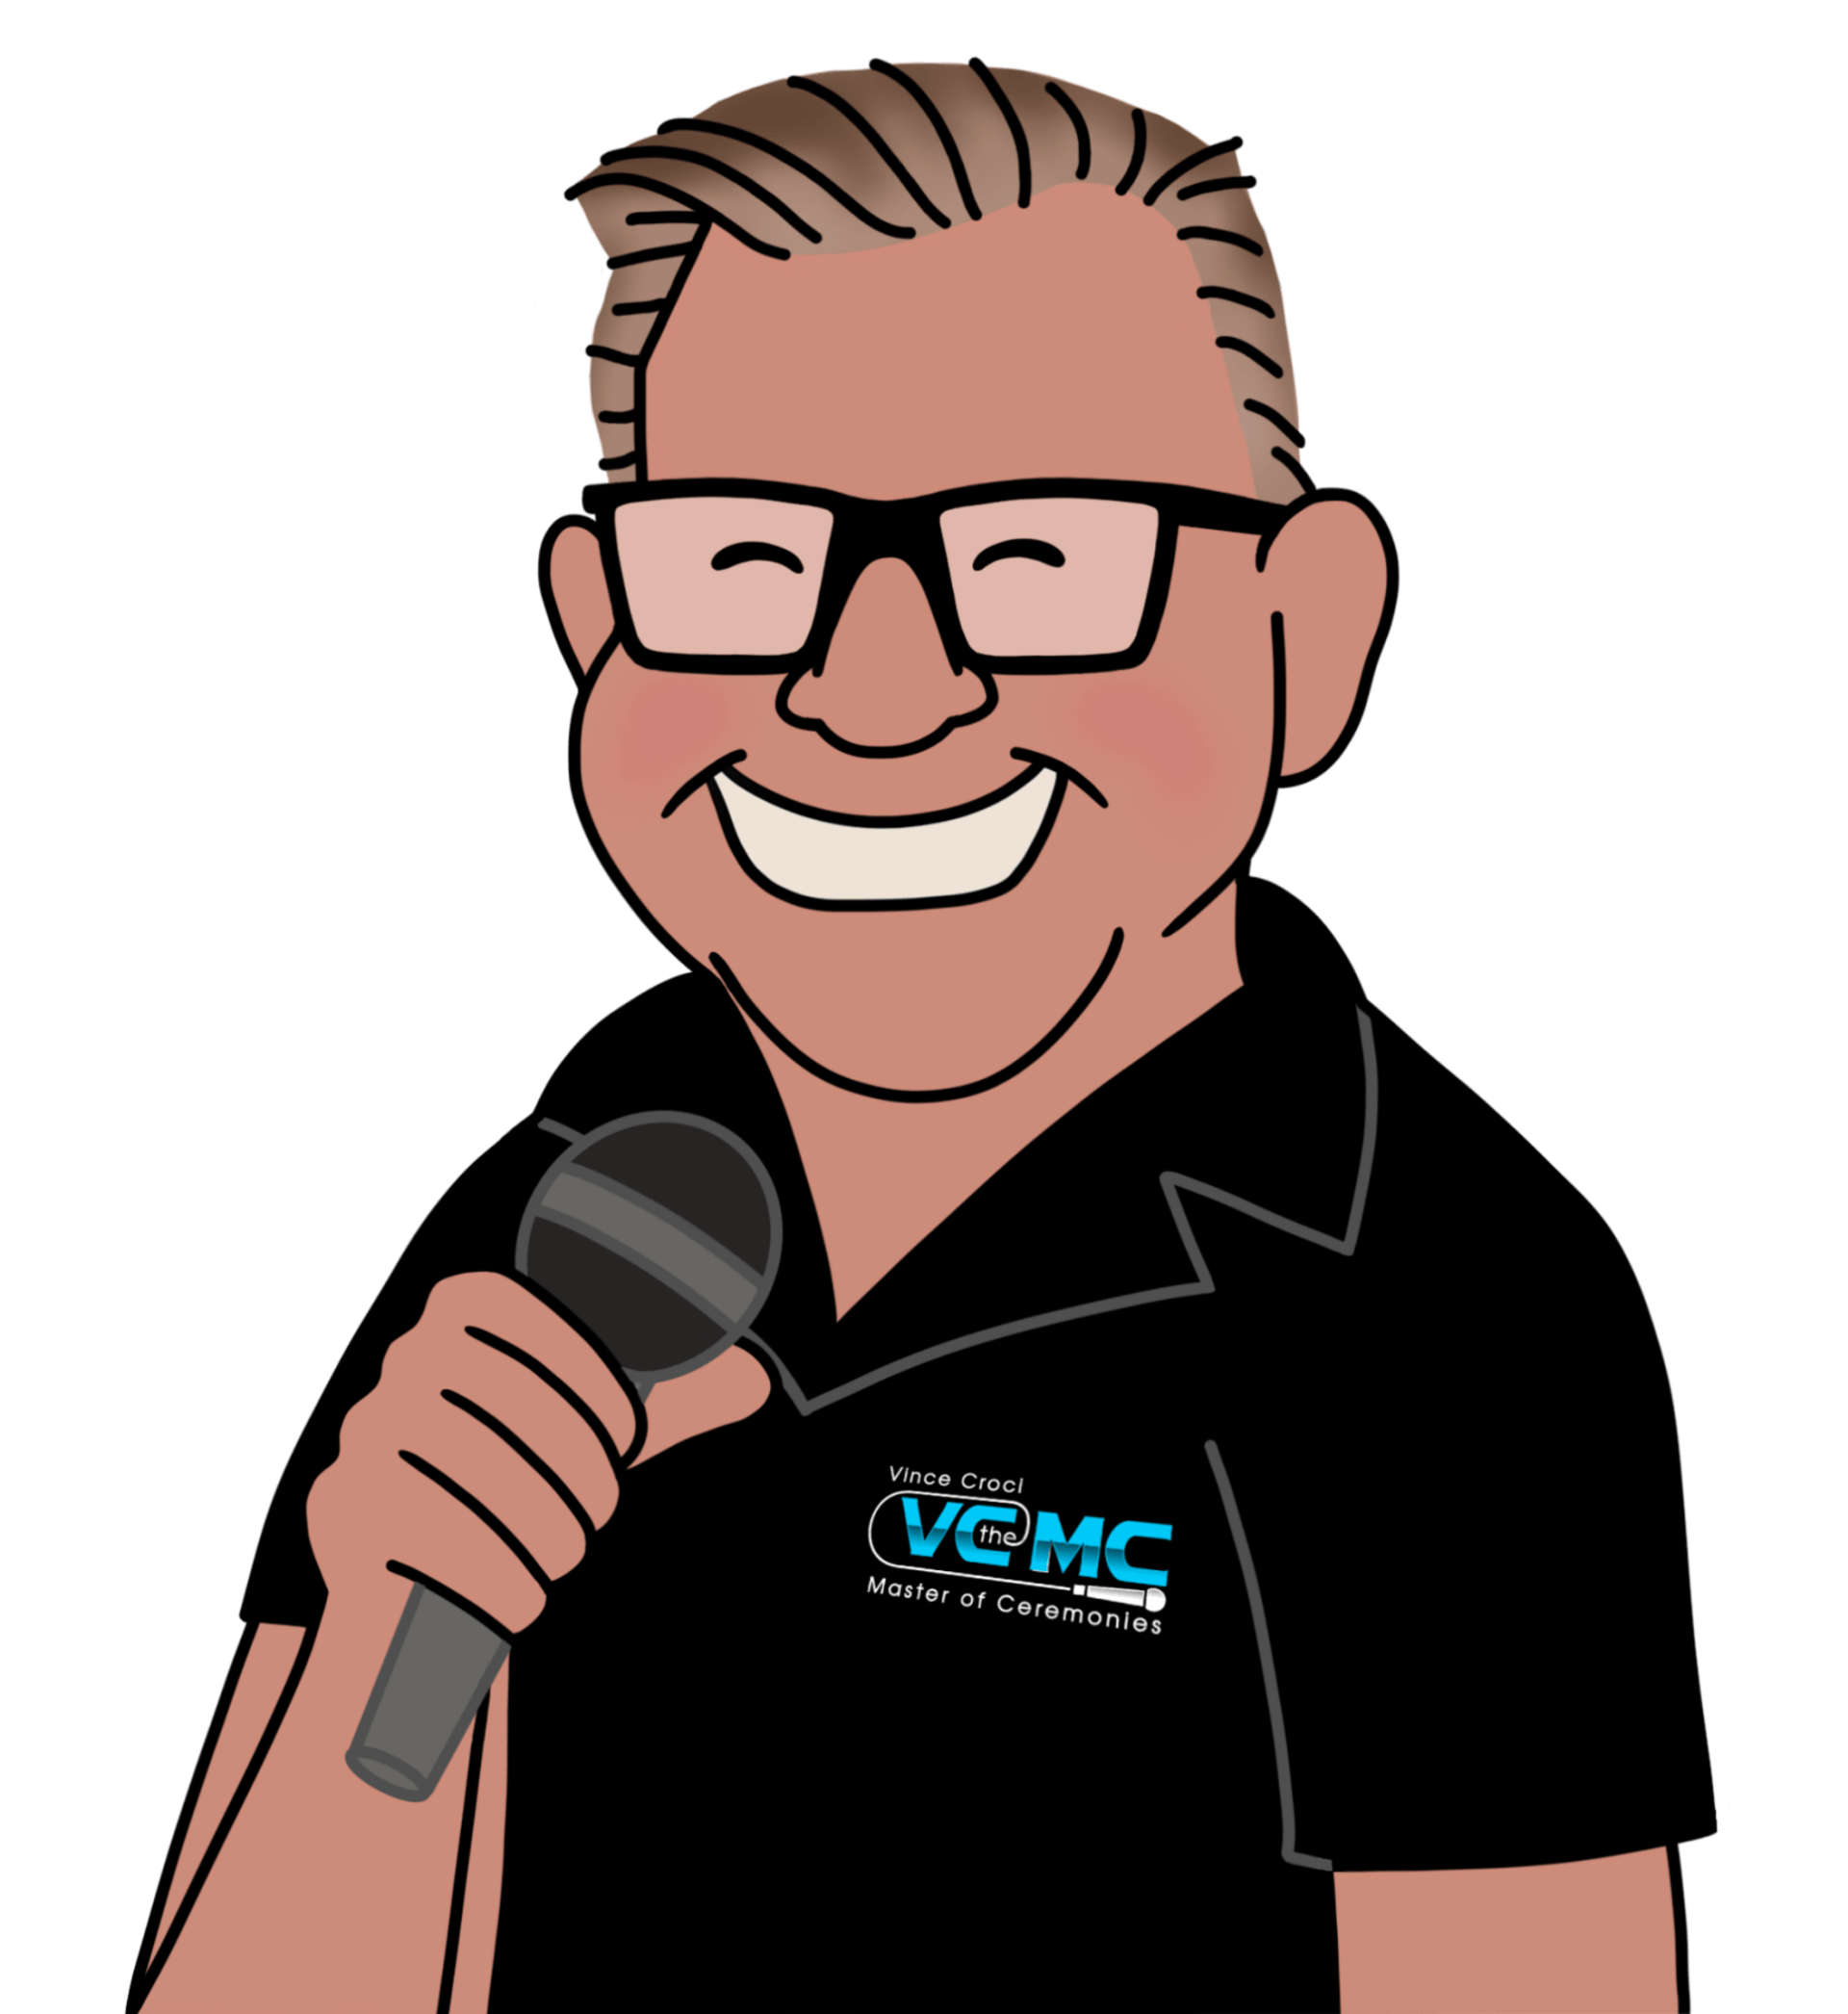 professional event host and corporate event emcee vince croci